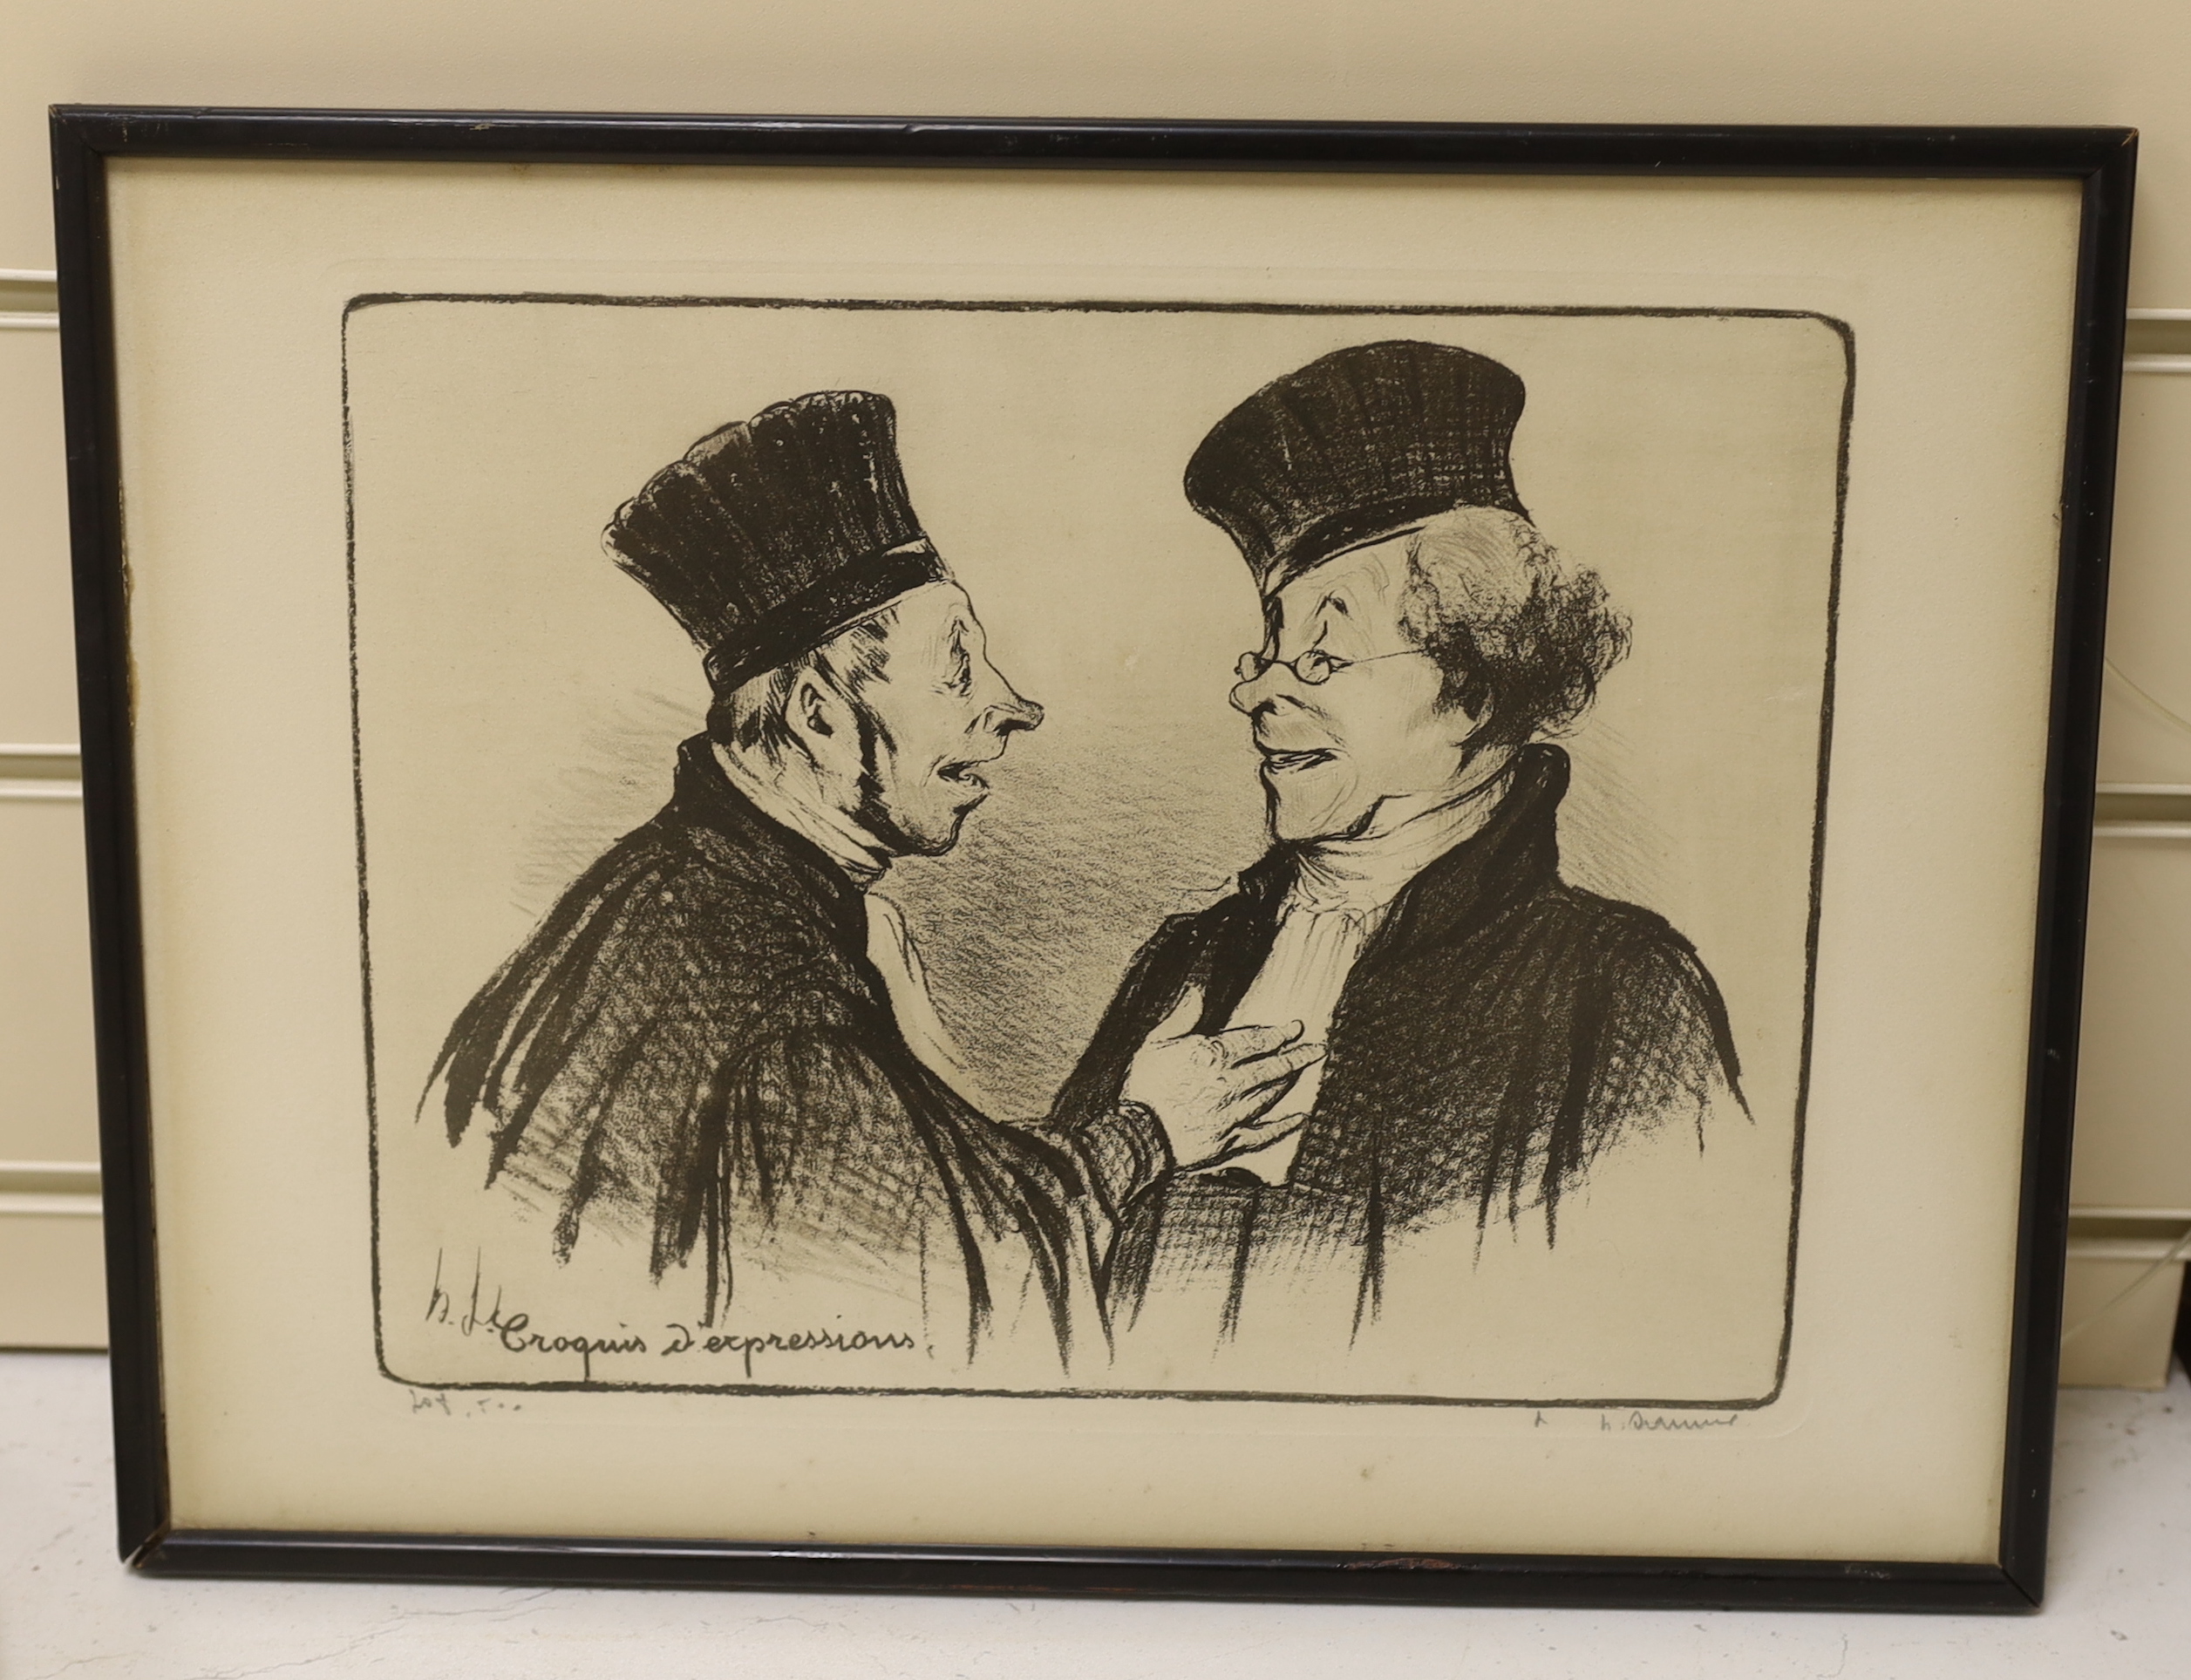 Honoré Daumier (French, 1808-1879), lithograph, ‘Croquis d'Expressions’, signed in pencil, 27 x 36cm